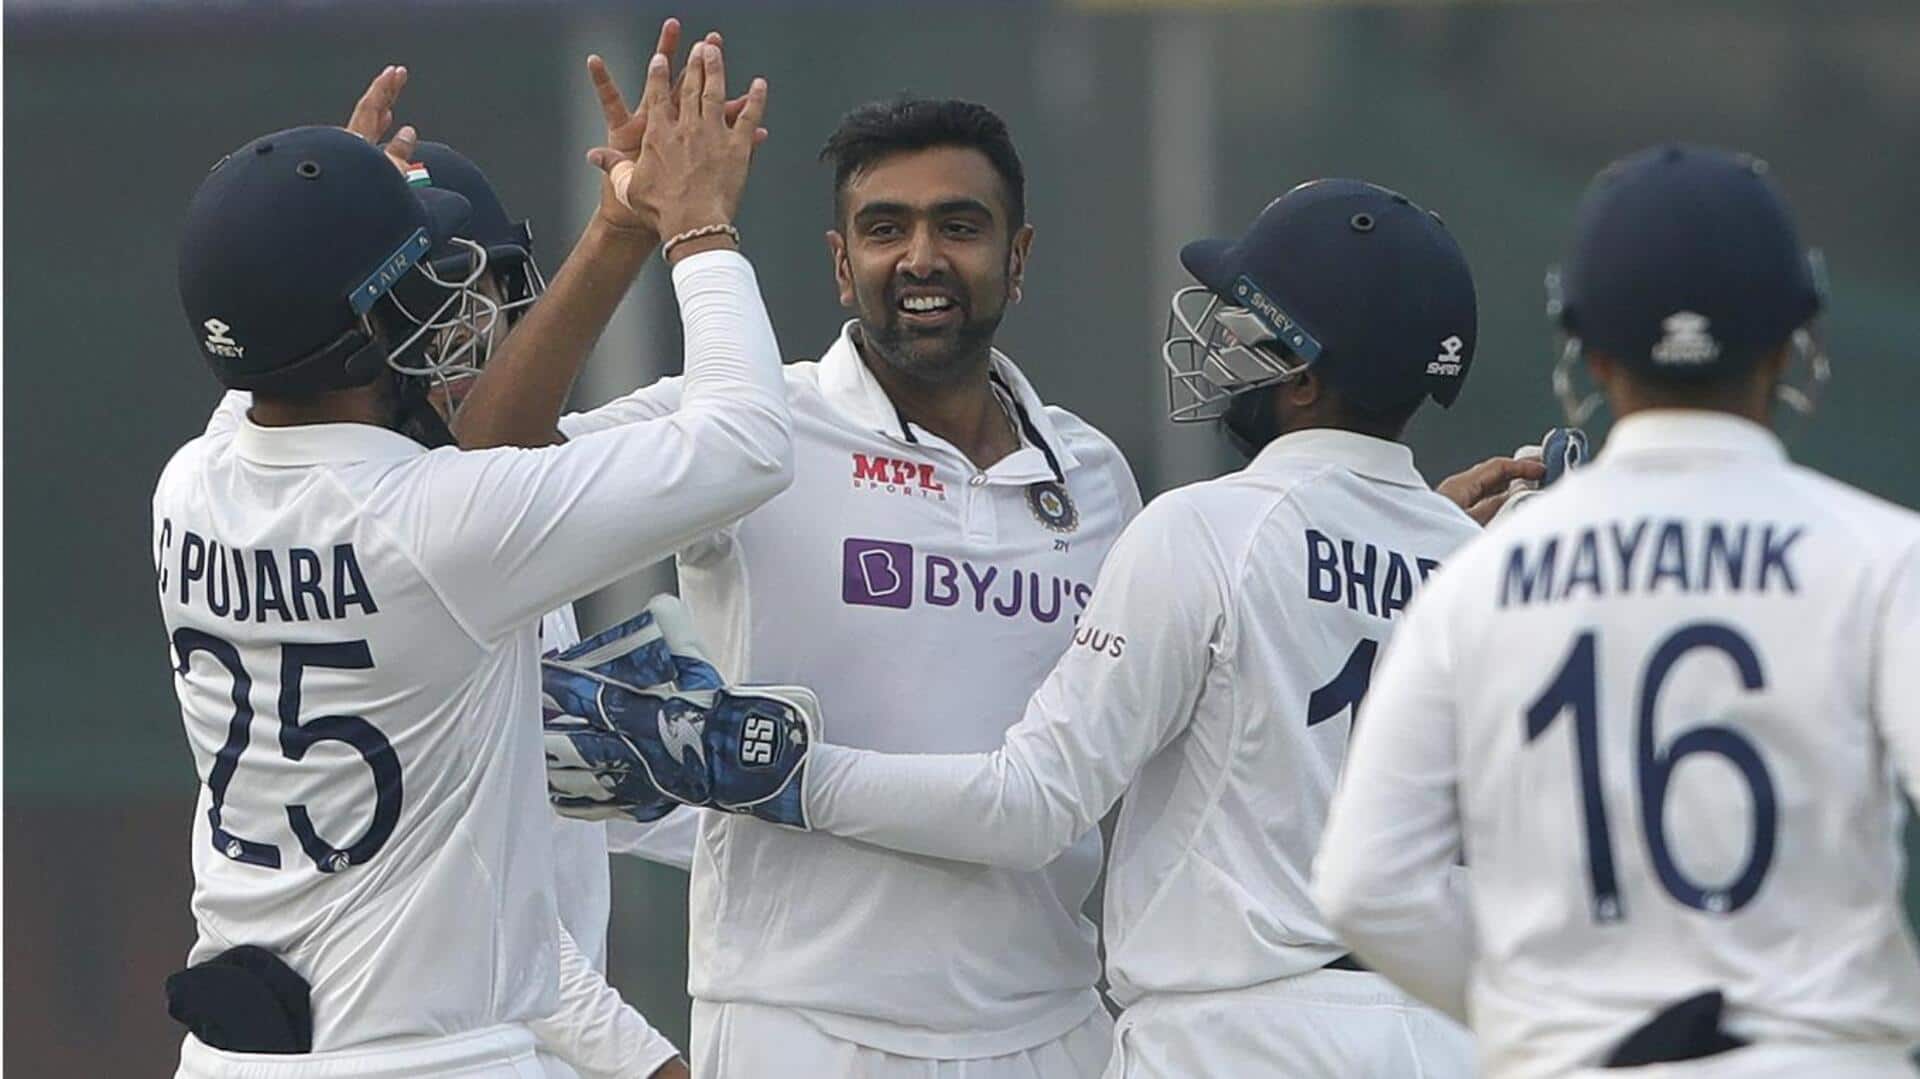 Ashwin has dismissed Stokes 11 times in Tests: Key stats